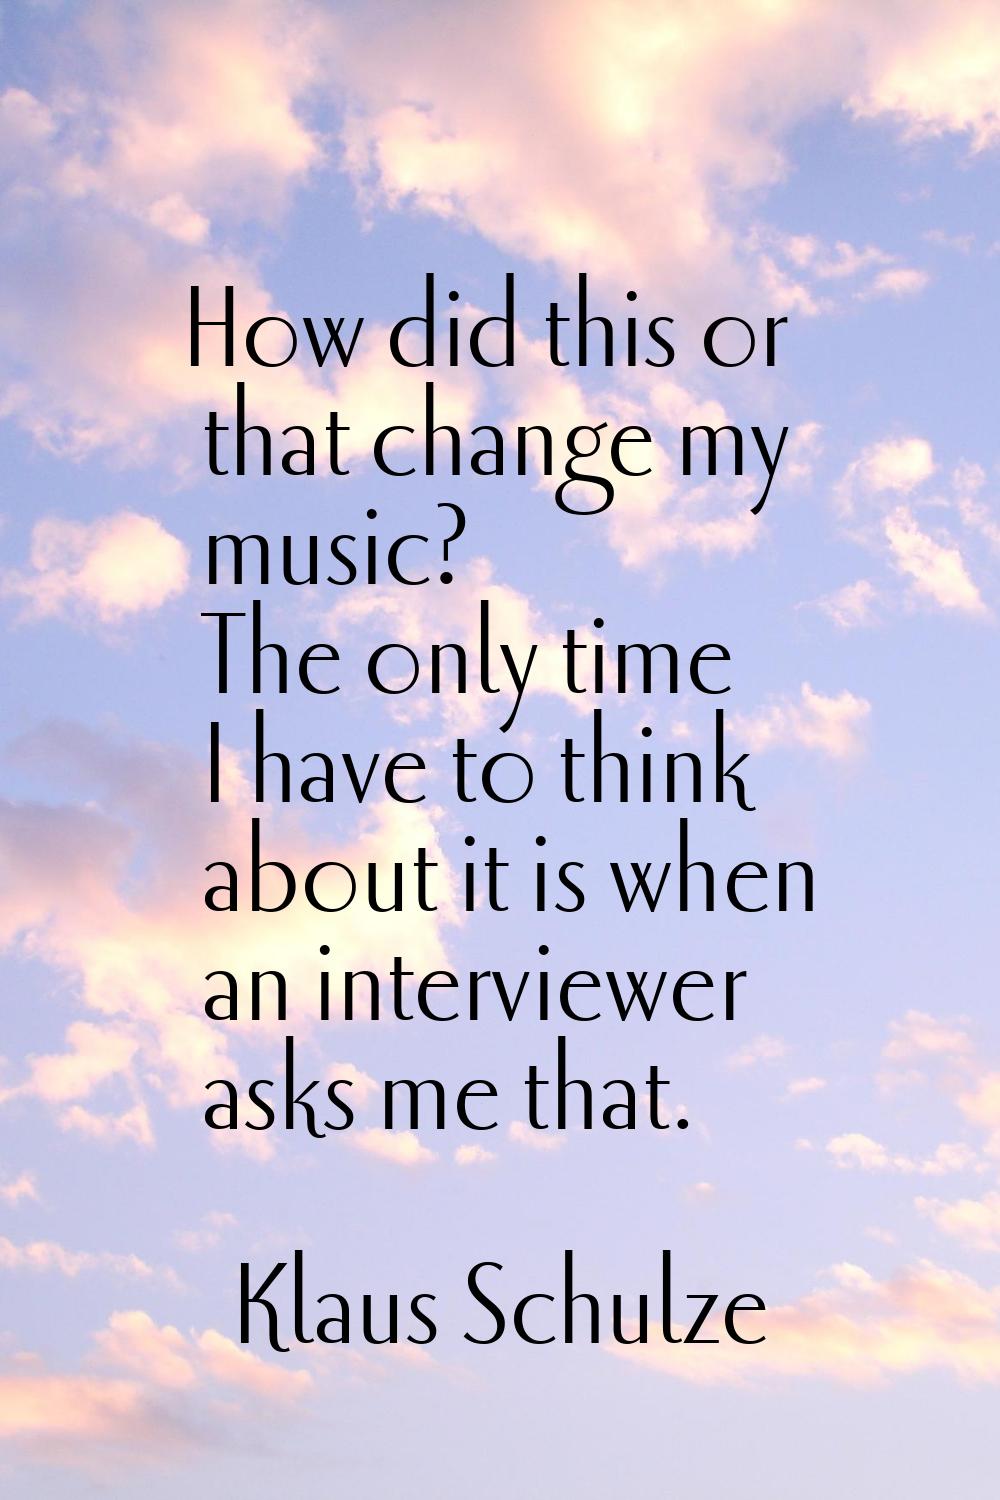 How did this or that change my music? The only time I have to think about it is when an interviewer